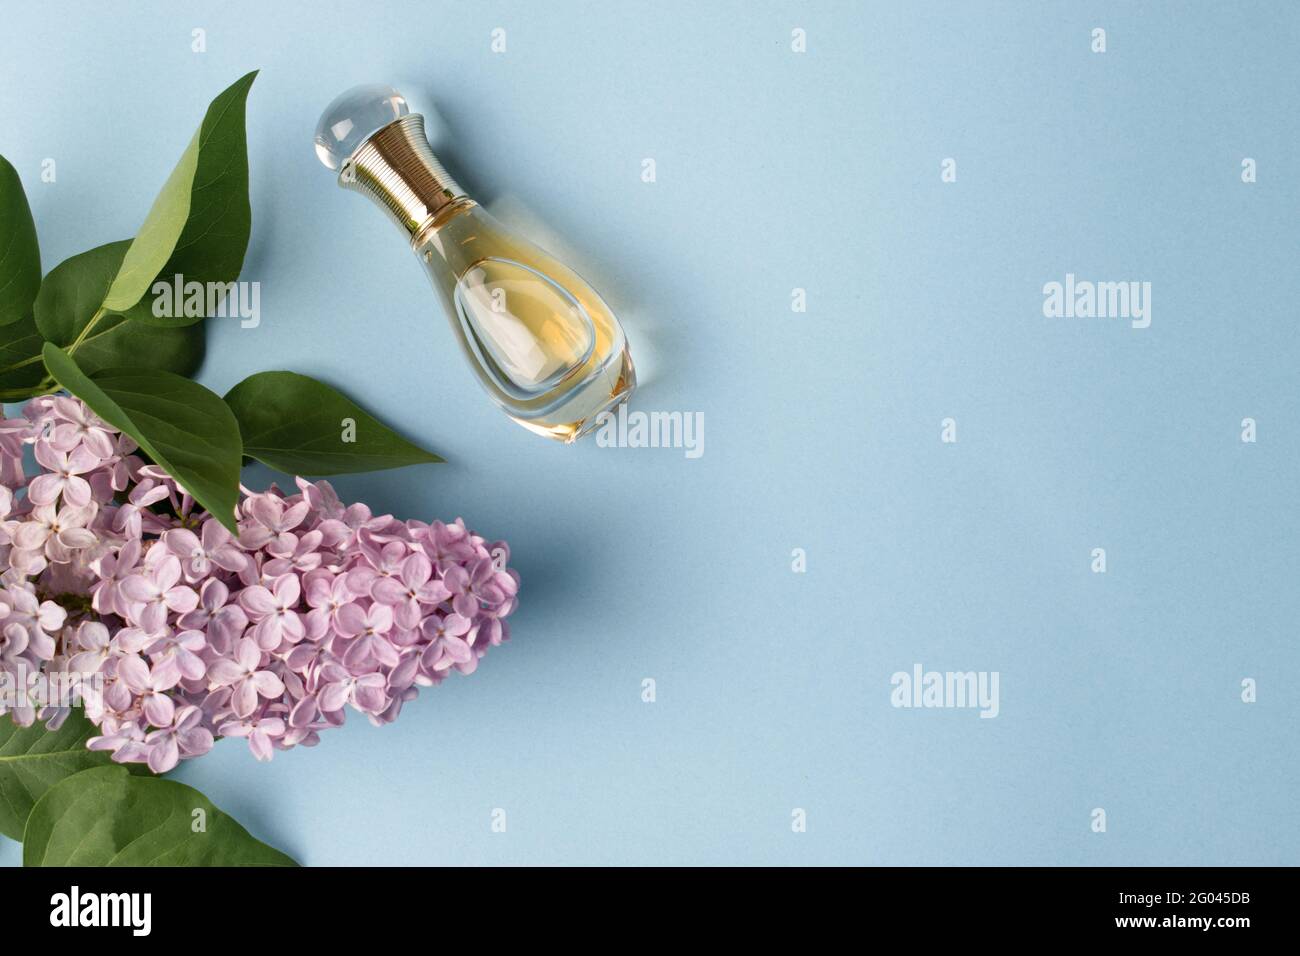 YEREVAN, ARMENIA - May 30, 2021: Dior perfume on the light blue background with flowers and leaves. Beautiful design and feminine fragrance for women. Stock Photo